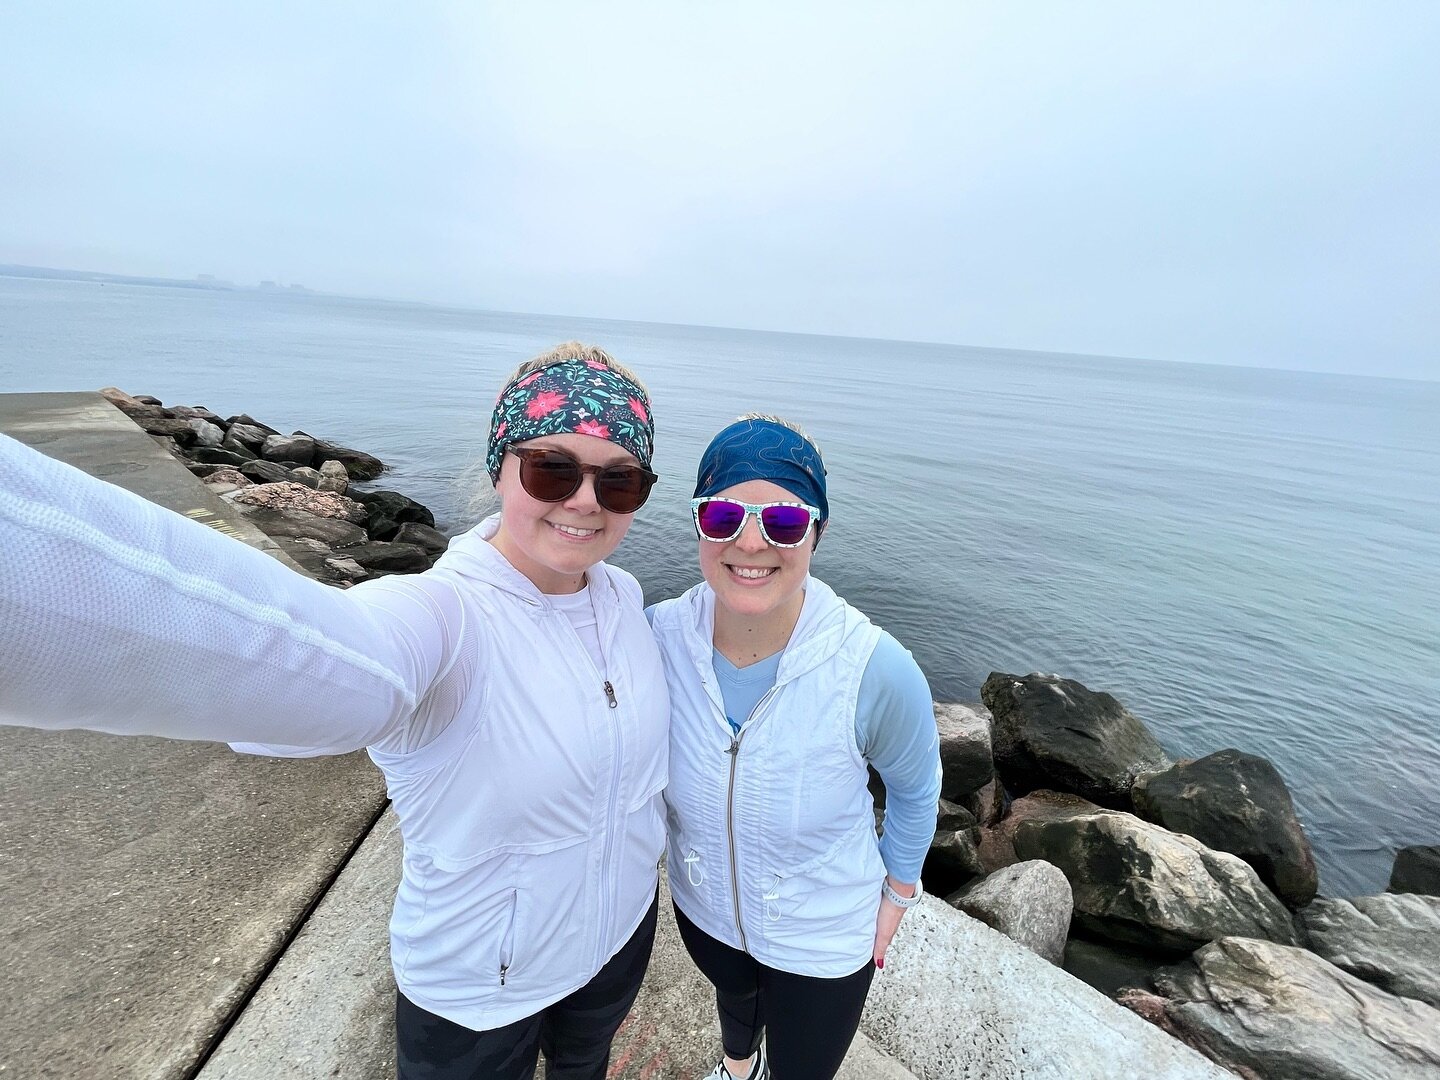 Saturday 10k! Super easy, lots of convo, lots of water views (per usual 😉)

We are celebrating Laura&rsquo;s birthday weekend with a run, followed by some brunch 🏃&zwj;♀️🥂